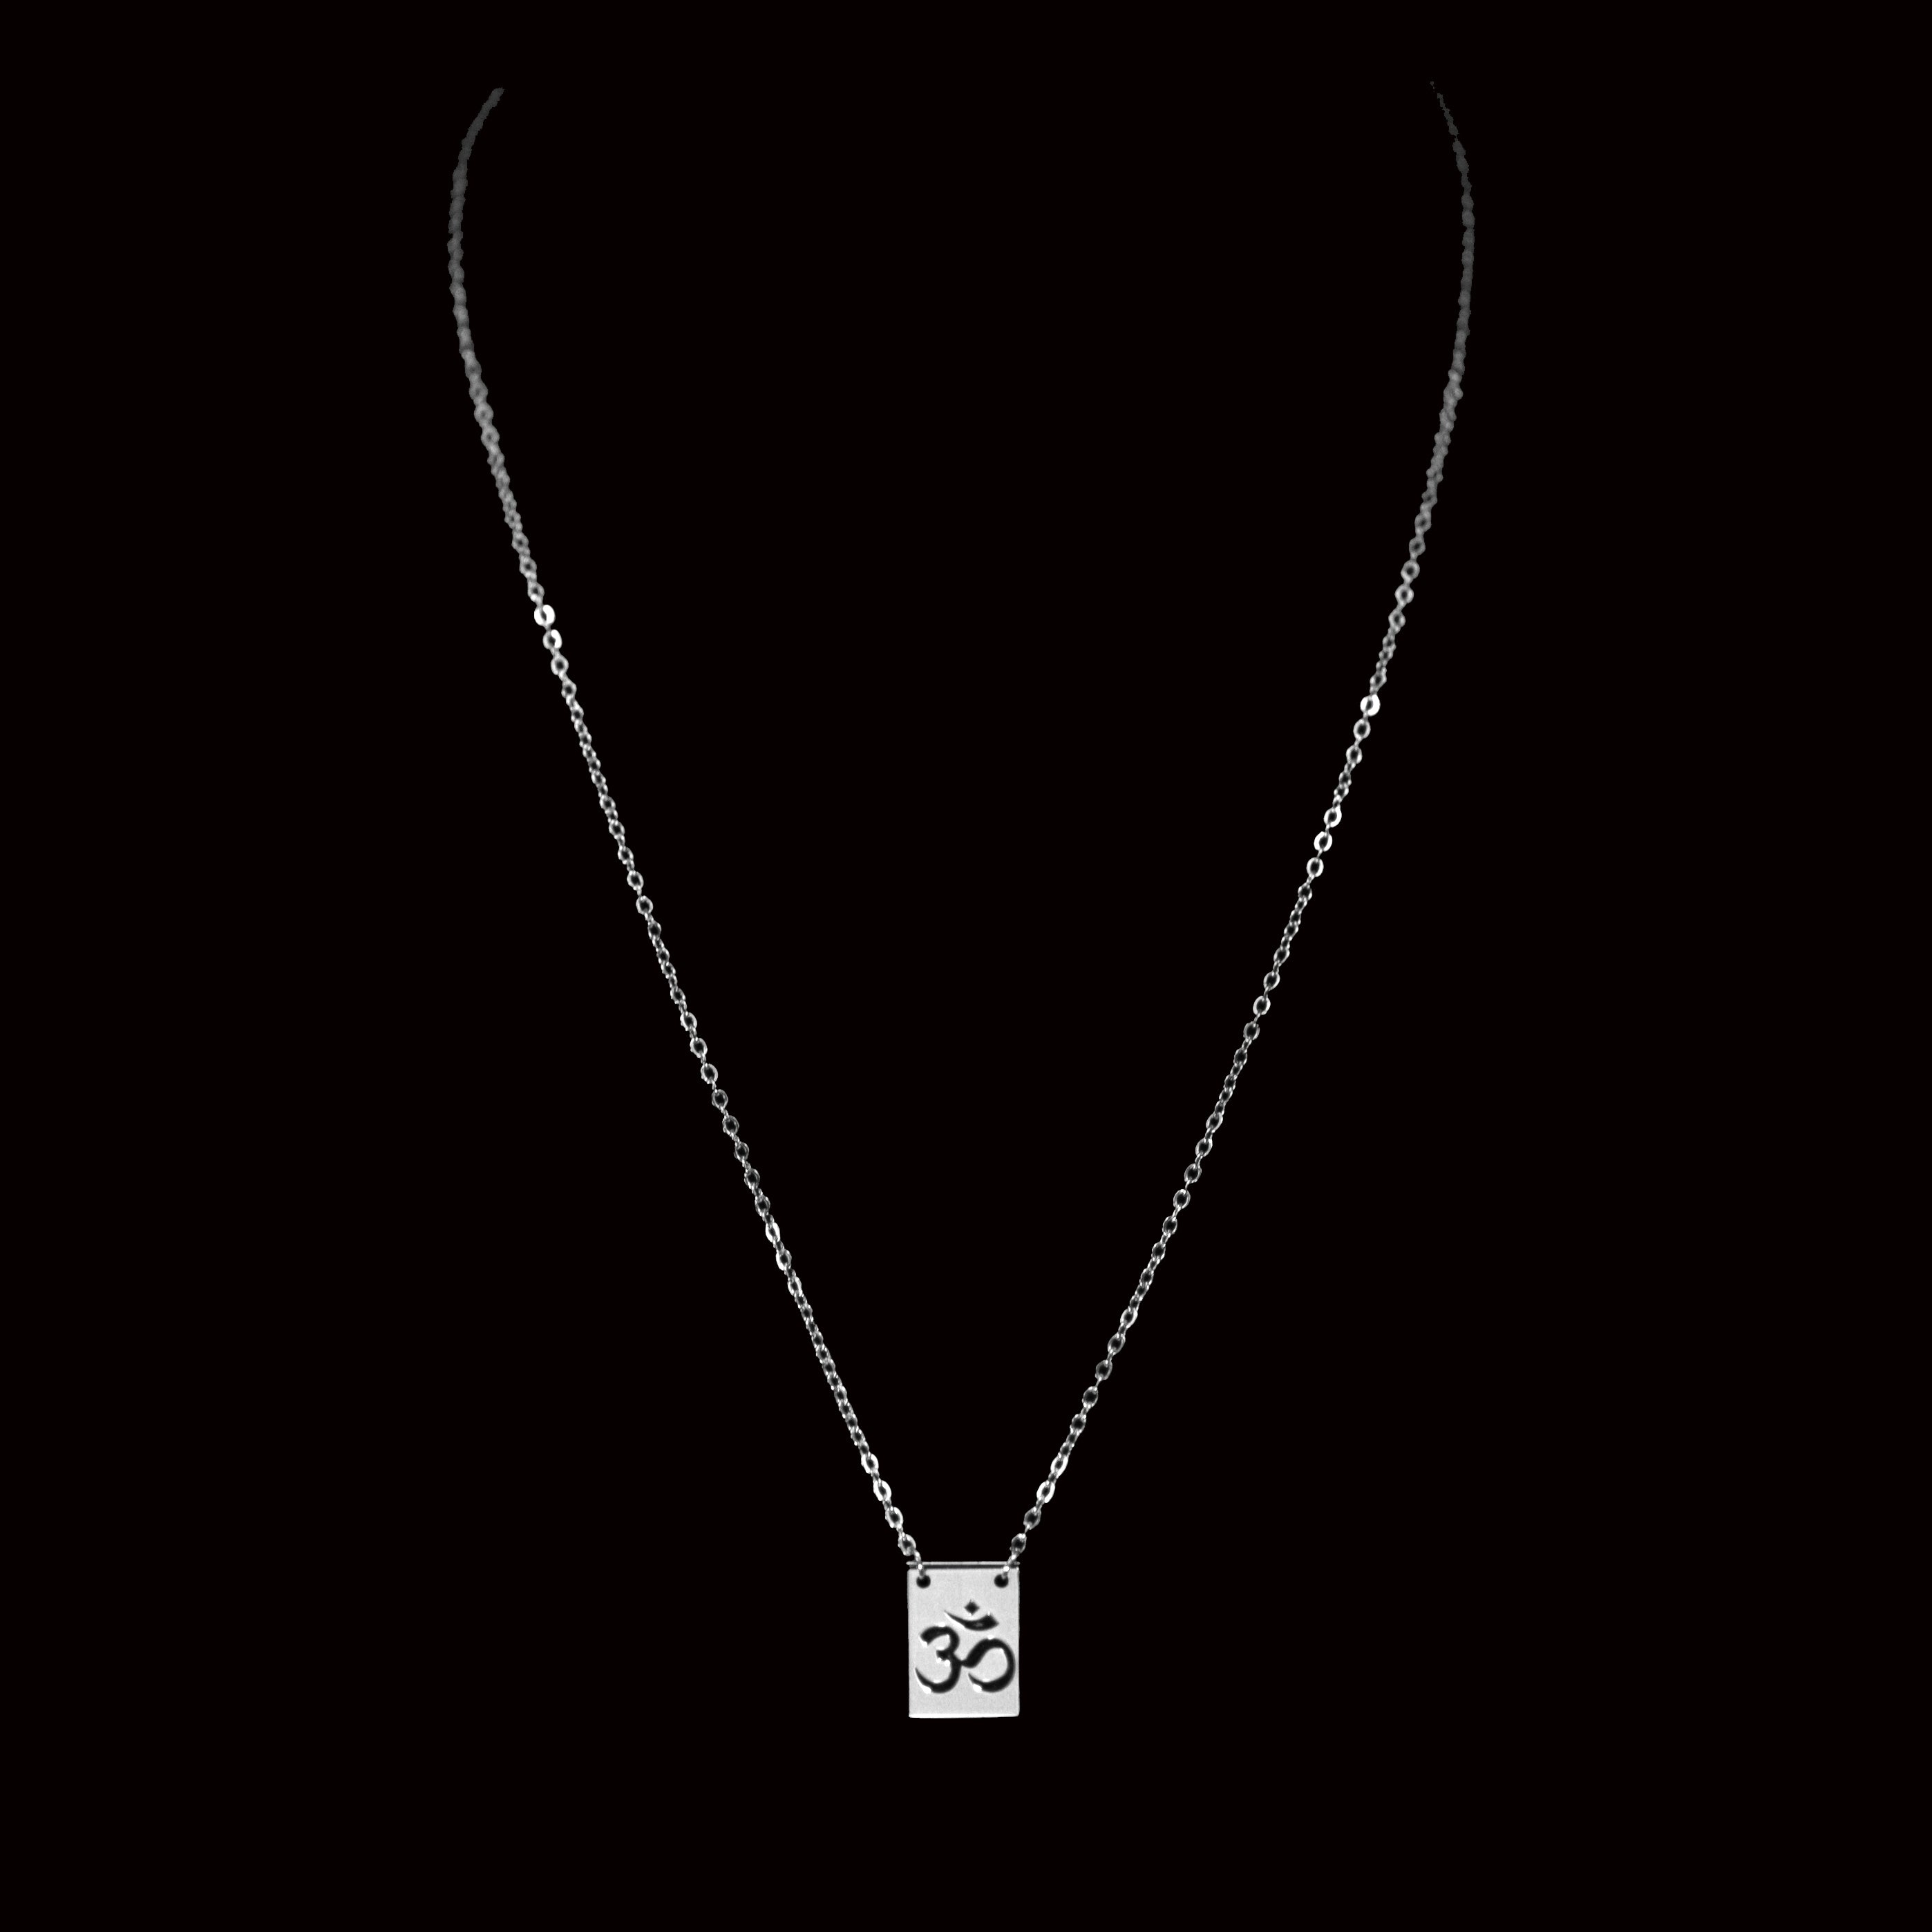 Lázaro Stainless Steel Chain Necklace with Symbolic Pendant